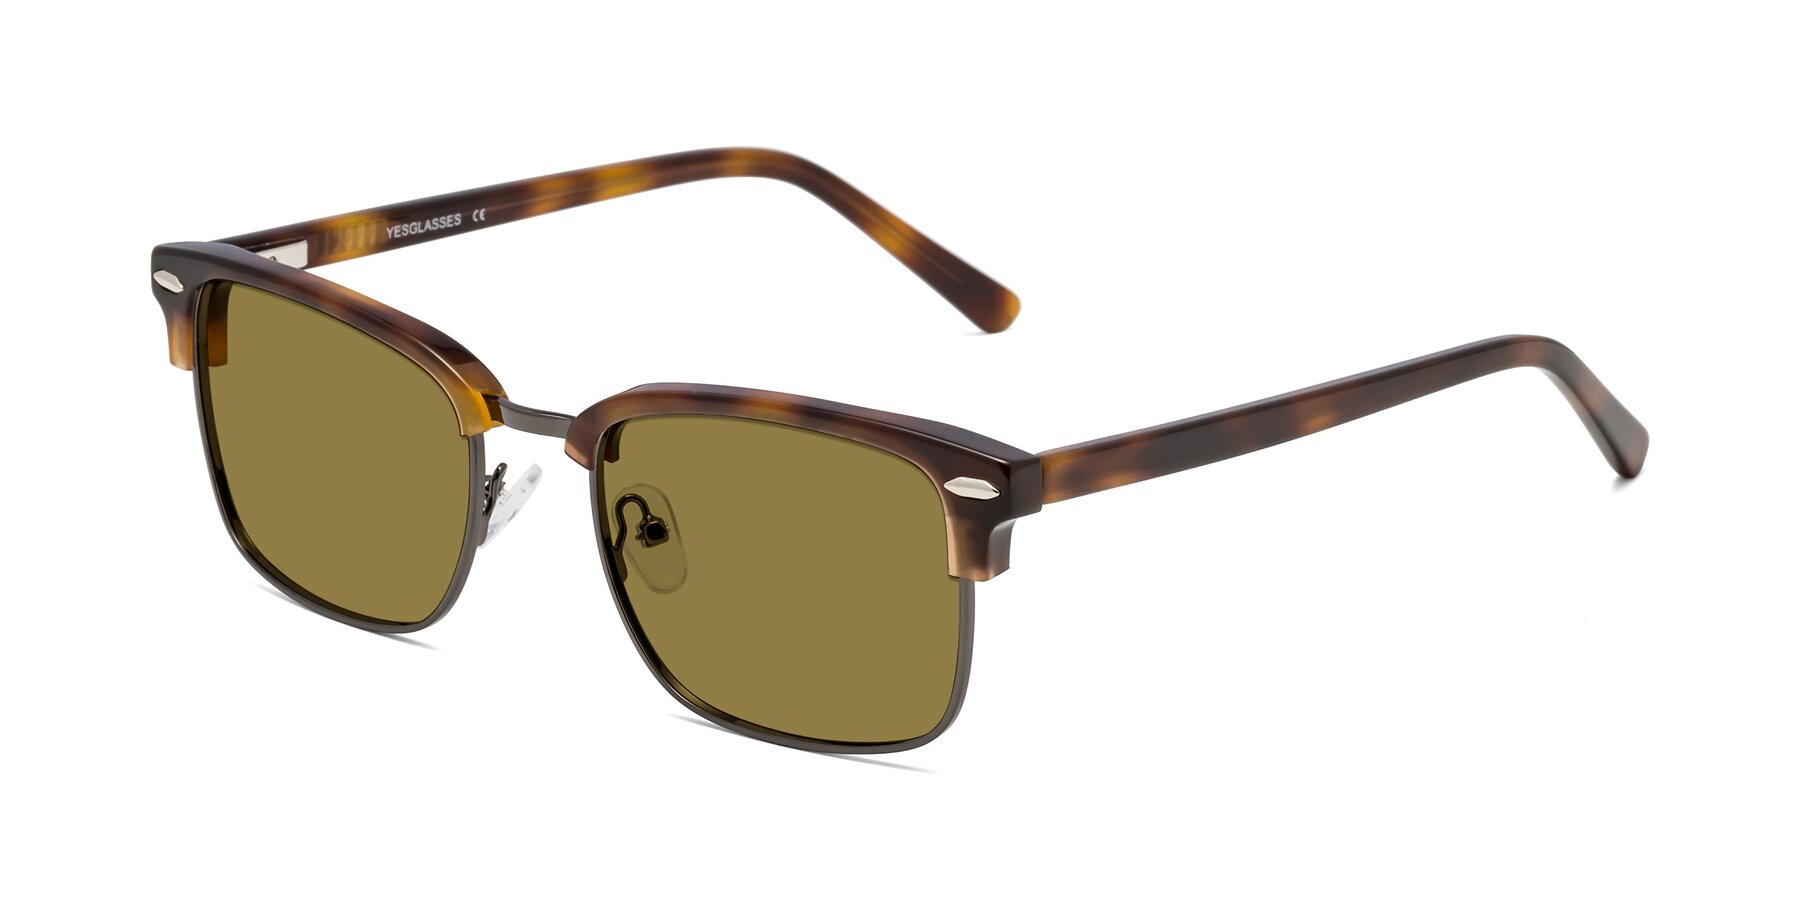 Angle of 17464 in Tortoise/ Gunmetal with Brown Polarized Lenses